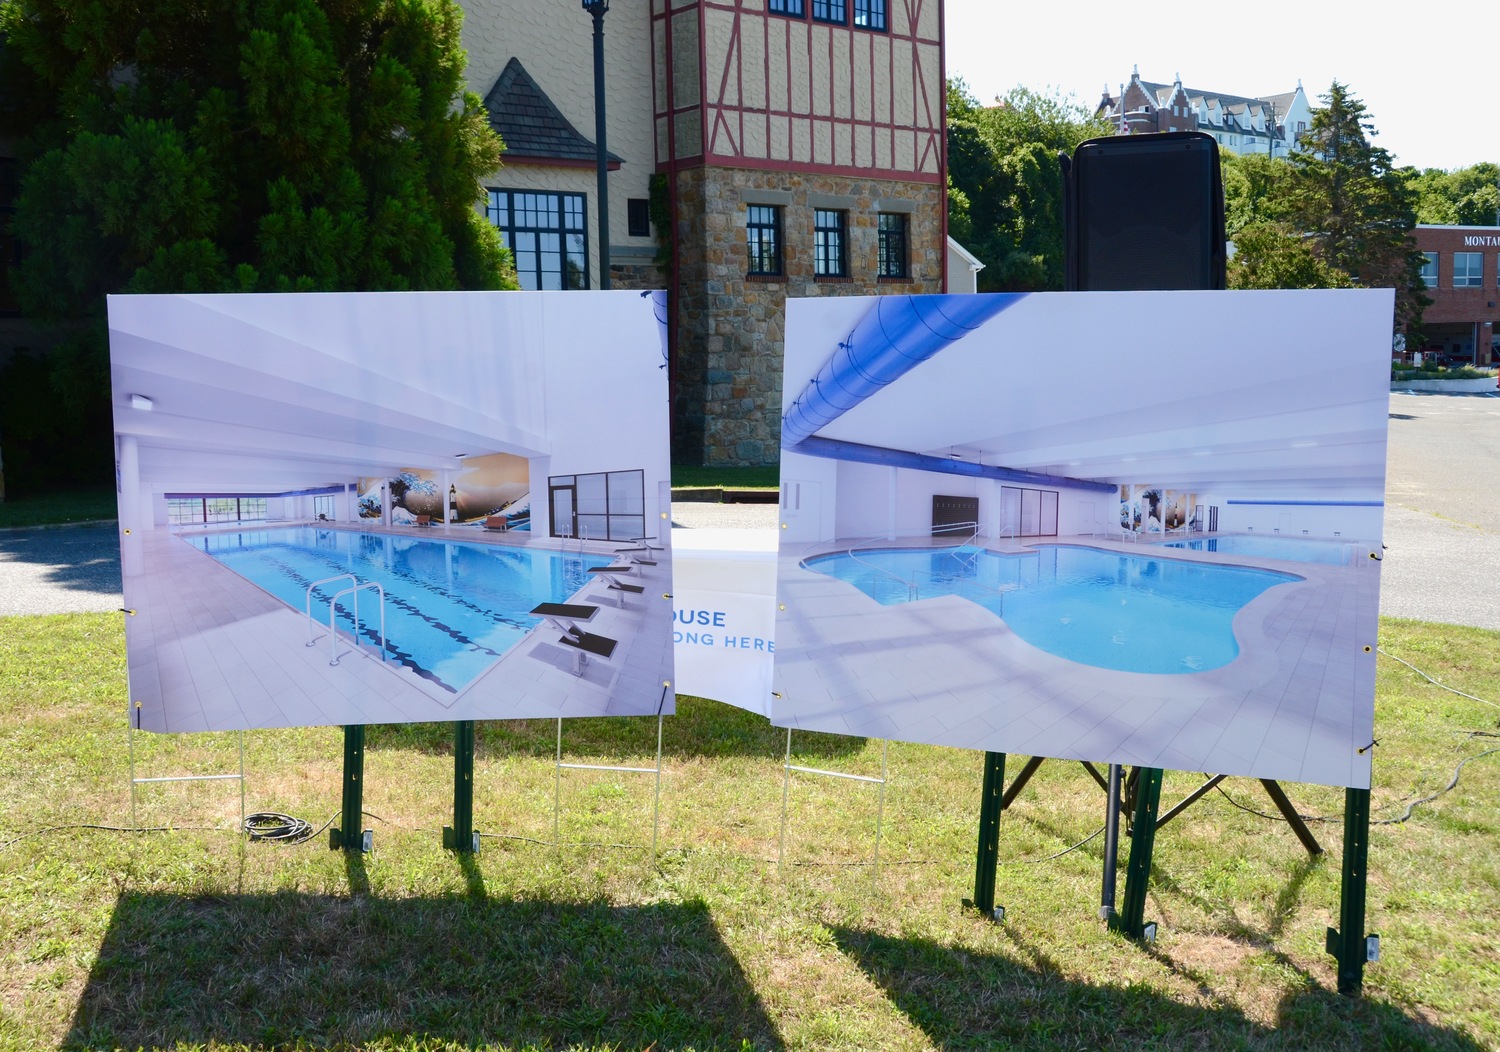 Building a community swimming pool within the Montauk Playhouse has been a goal of the town and Playhouse foundation for more than 20 years. EAST HAMPTON TOWN